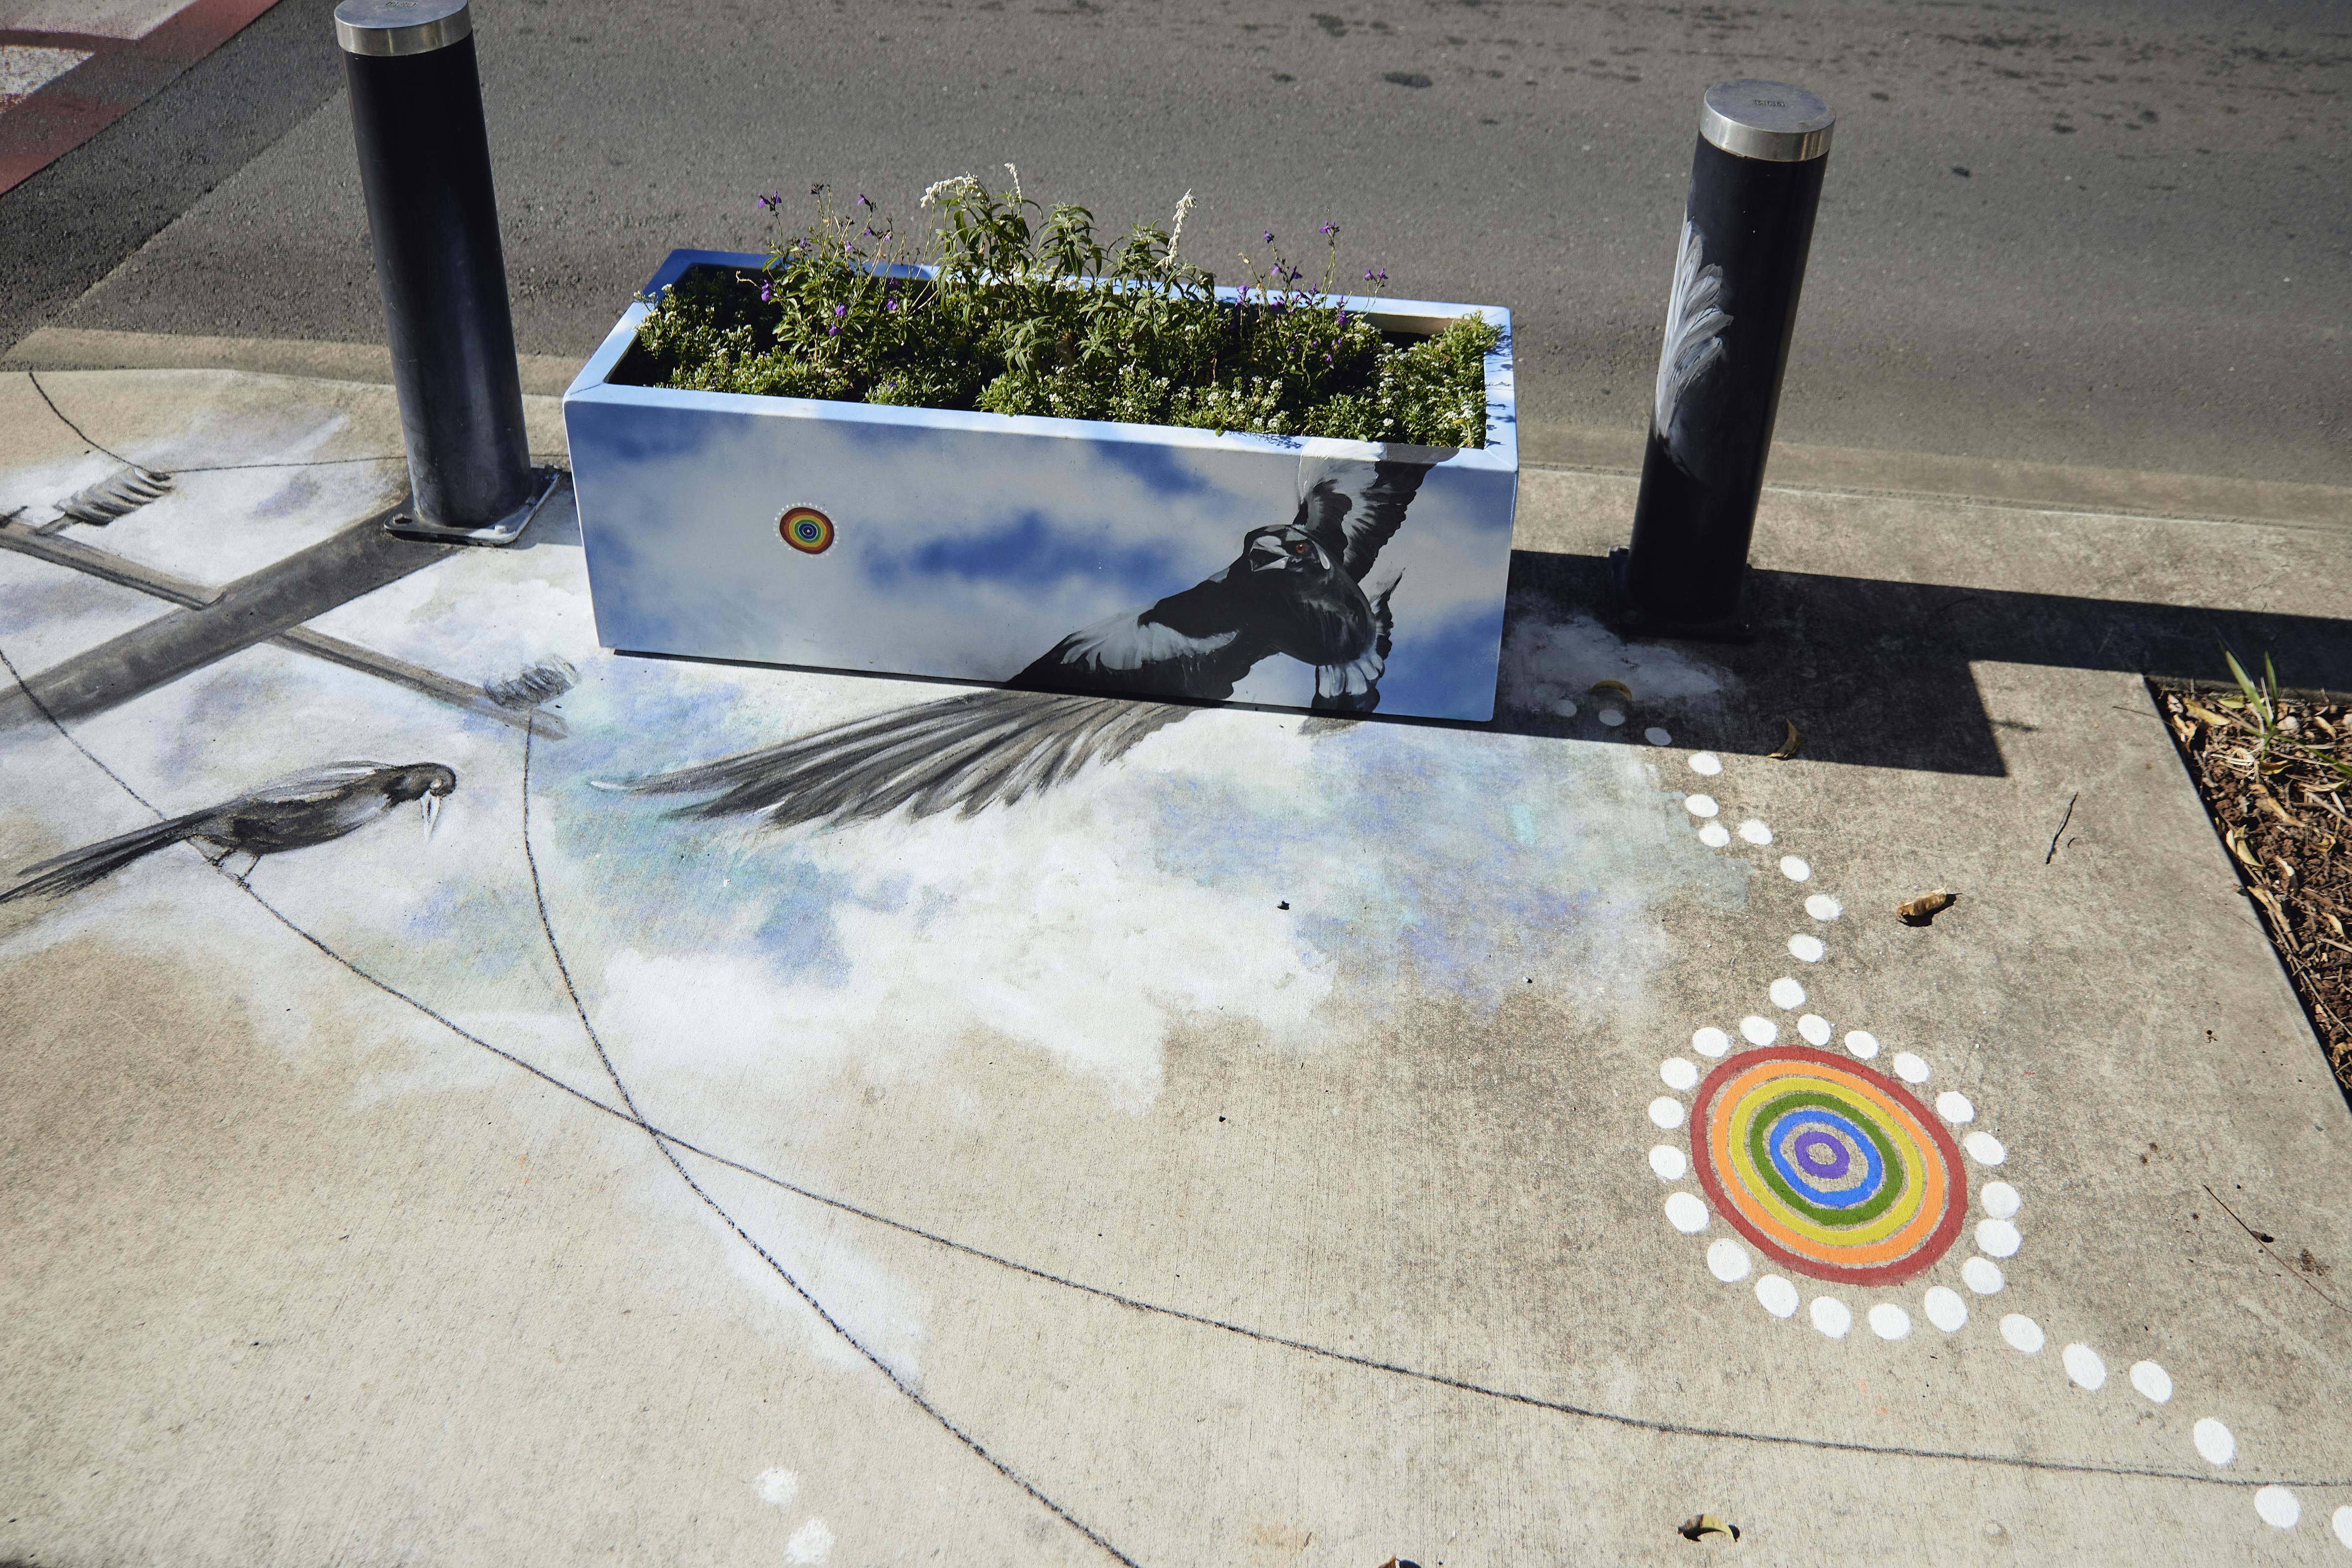 Cam Scale's air themed planter box is complimented with chalk art